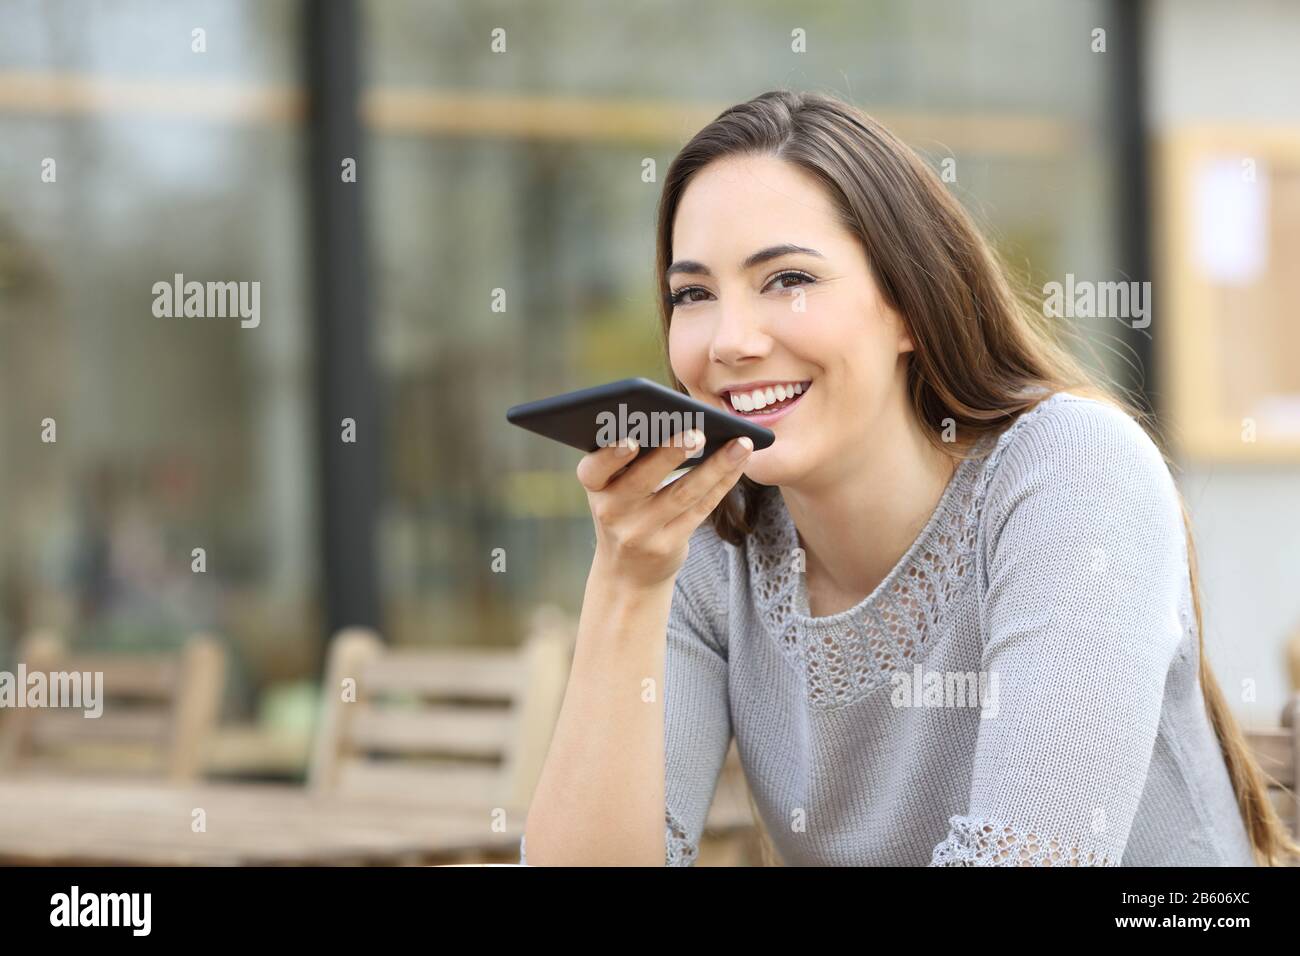 Happy woman using voice recognition system on her smart phone on a coffee shop terrace Stock Photo